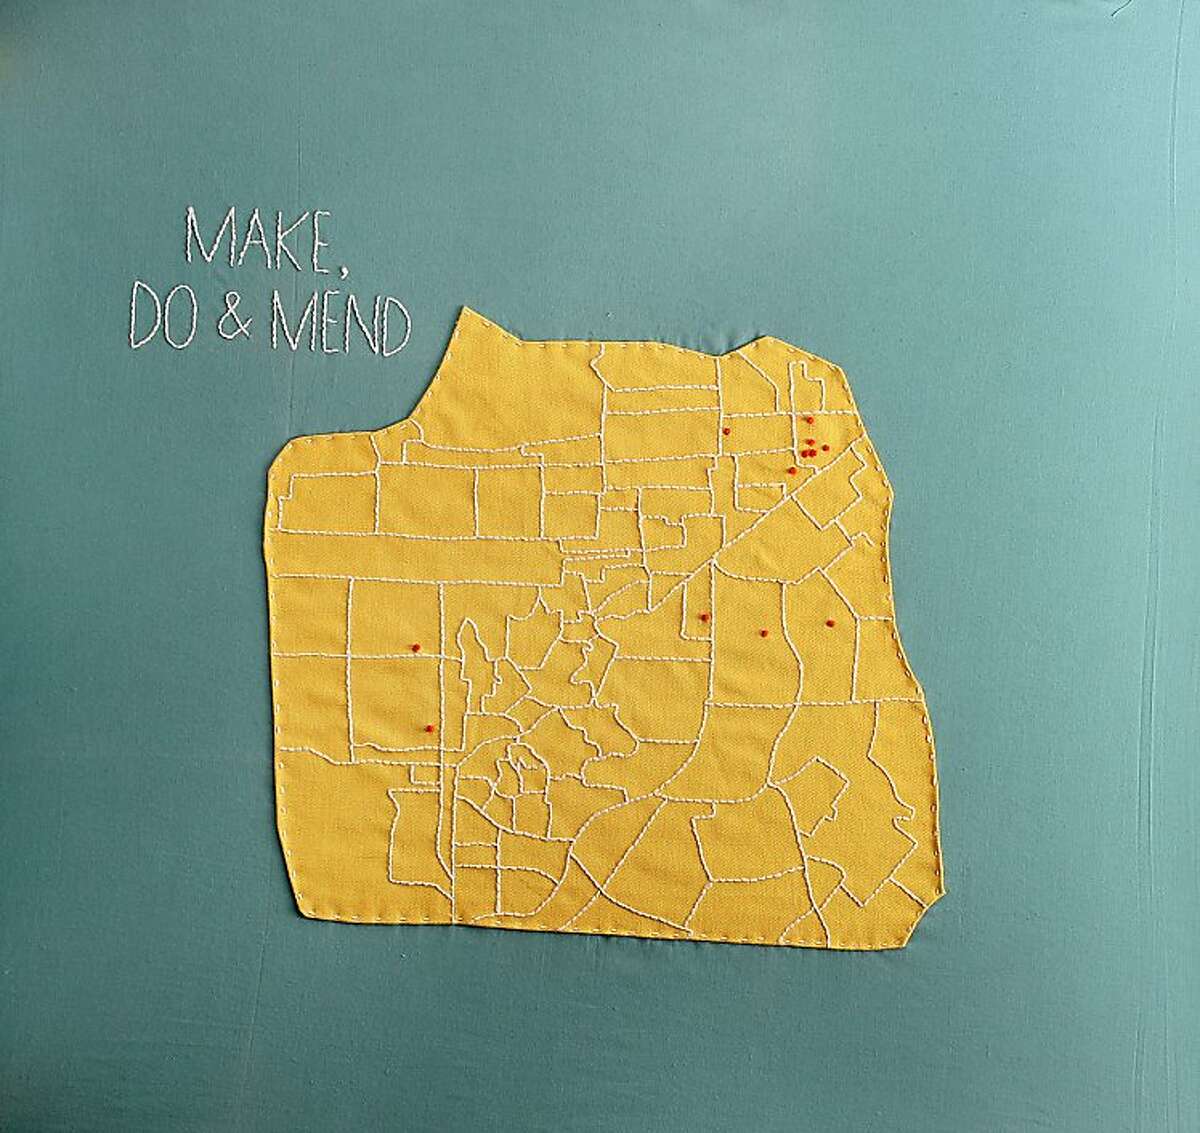 Artist Shannon May's hand-sewn "Style" cover and inside map photographed in San Francisco, Calif., on Tuesday, August 6, 2013.